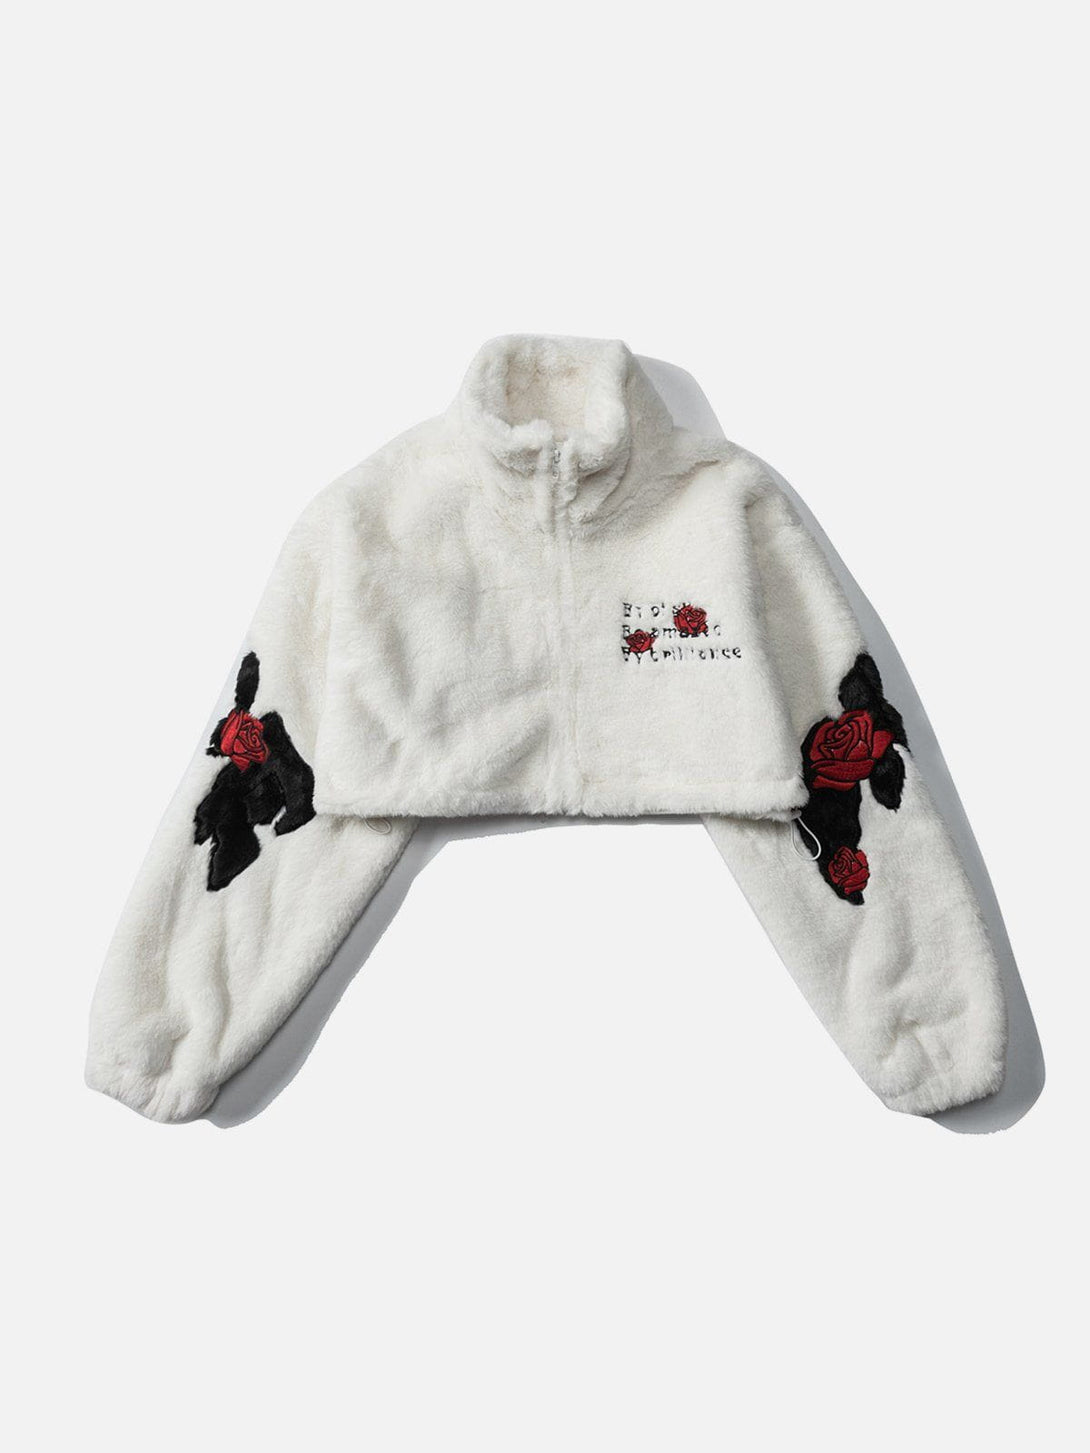 Majesda® - Embroidered Rose Letter Two Wear Sherpa Coat outfit ideas, streetwear fashion - majesda.com